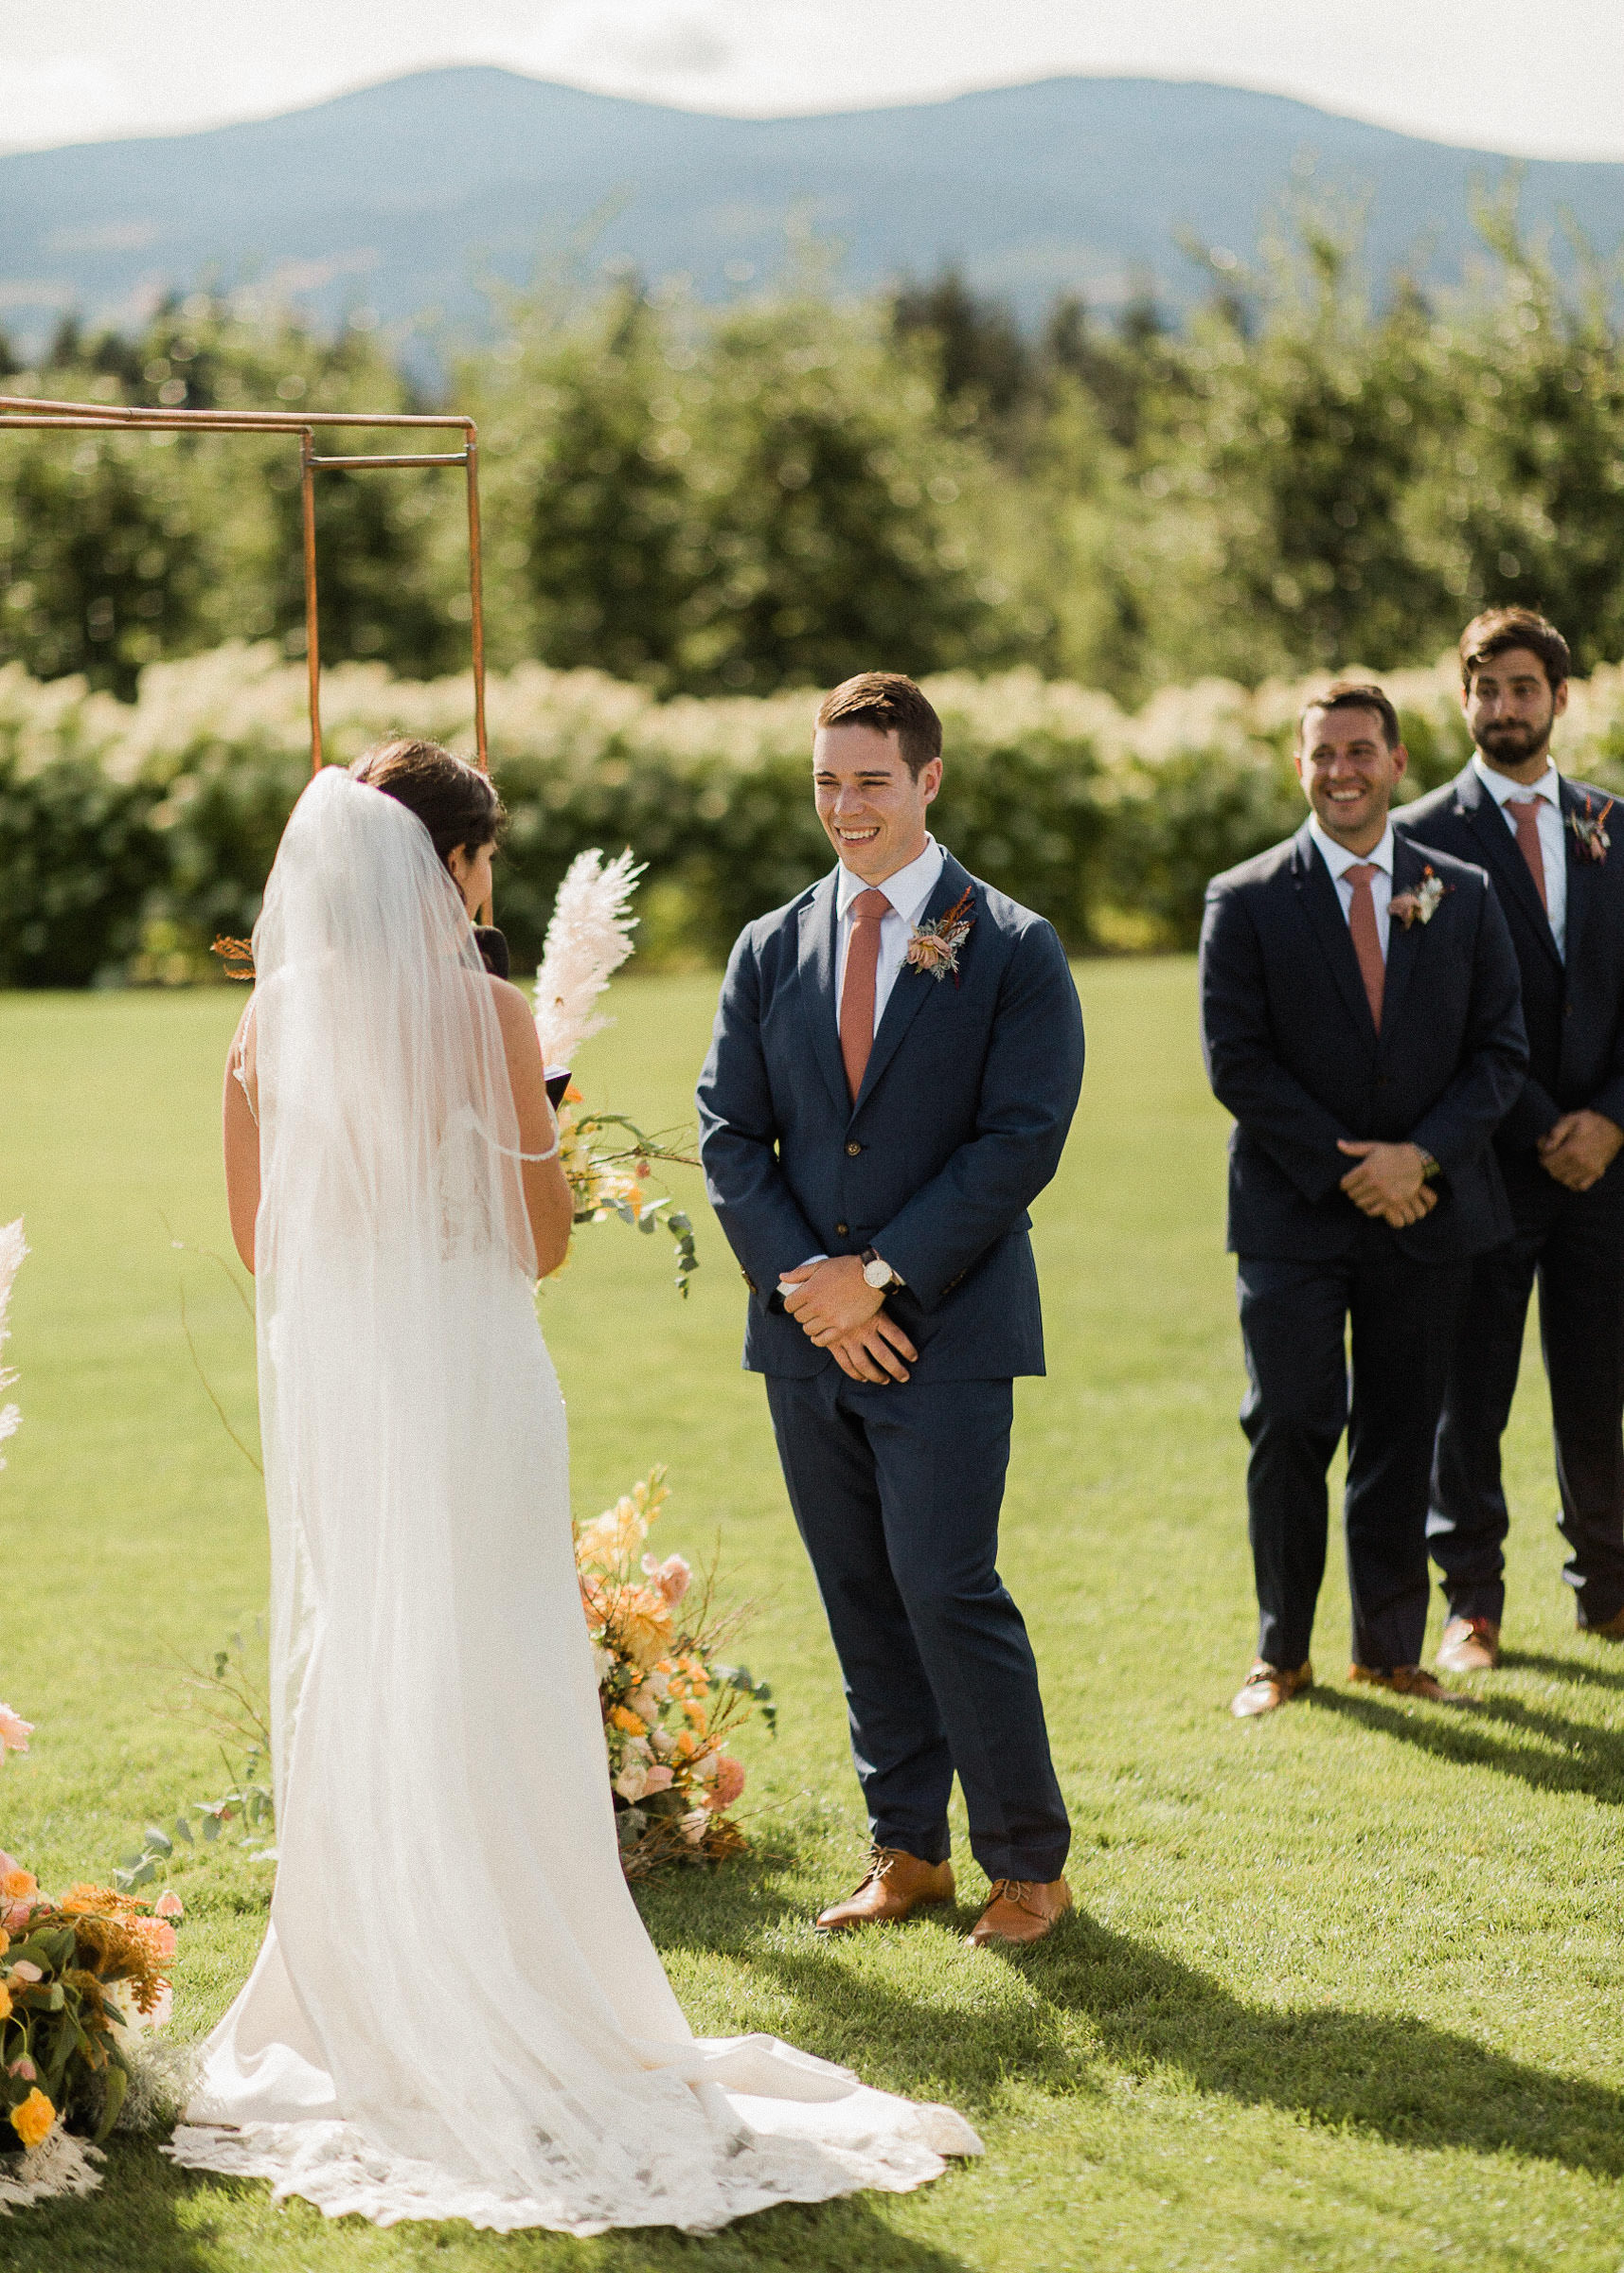 Groom smiles as bride reads vows during wedding ceremony at The Orchard